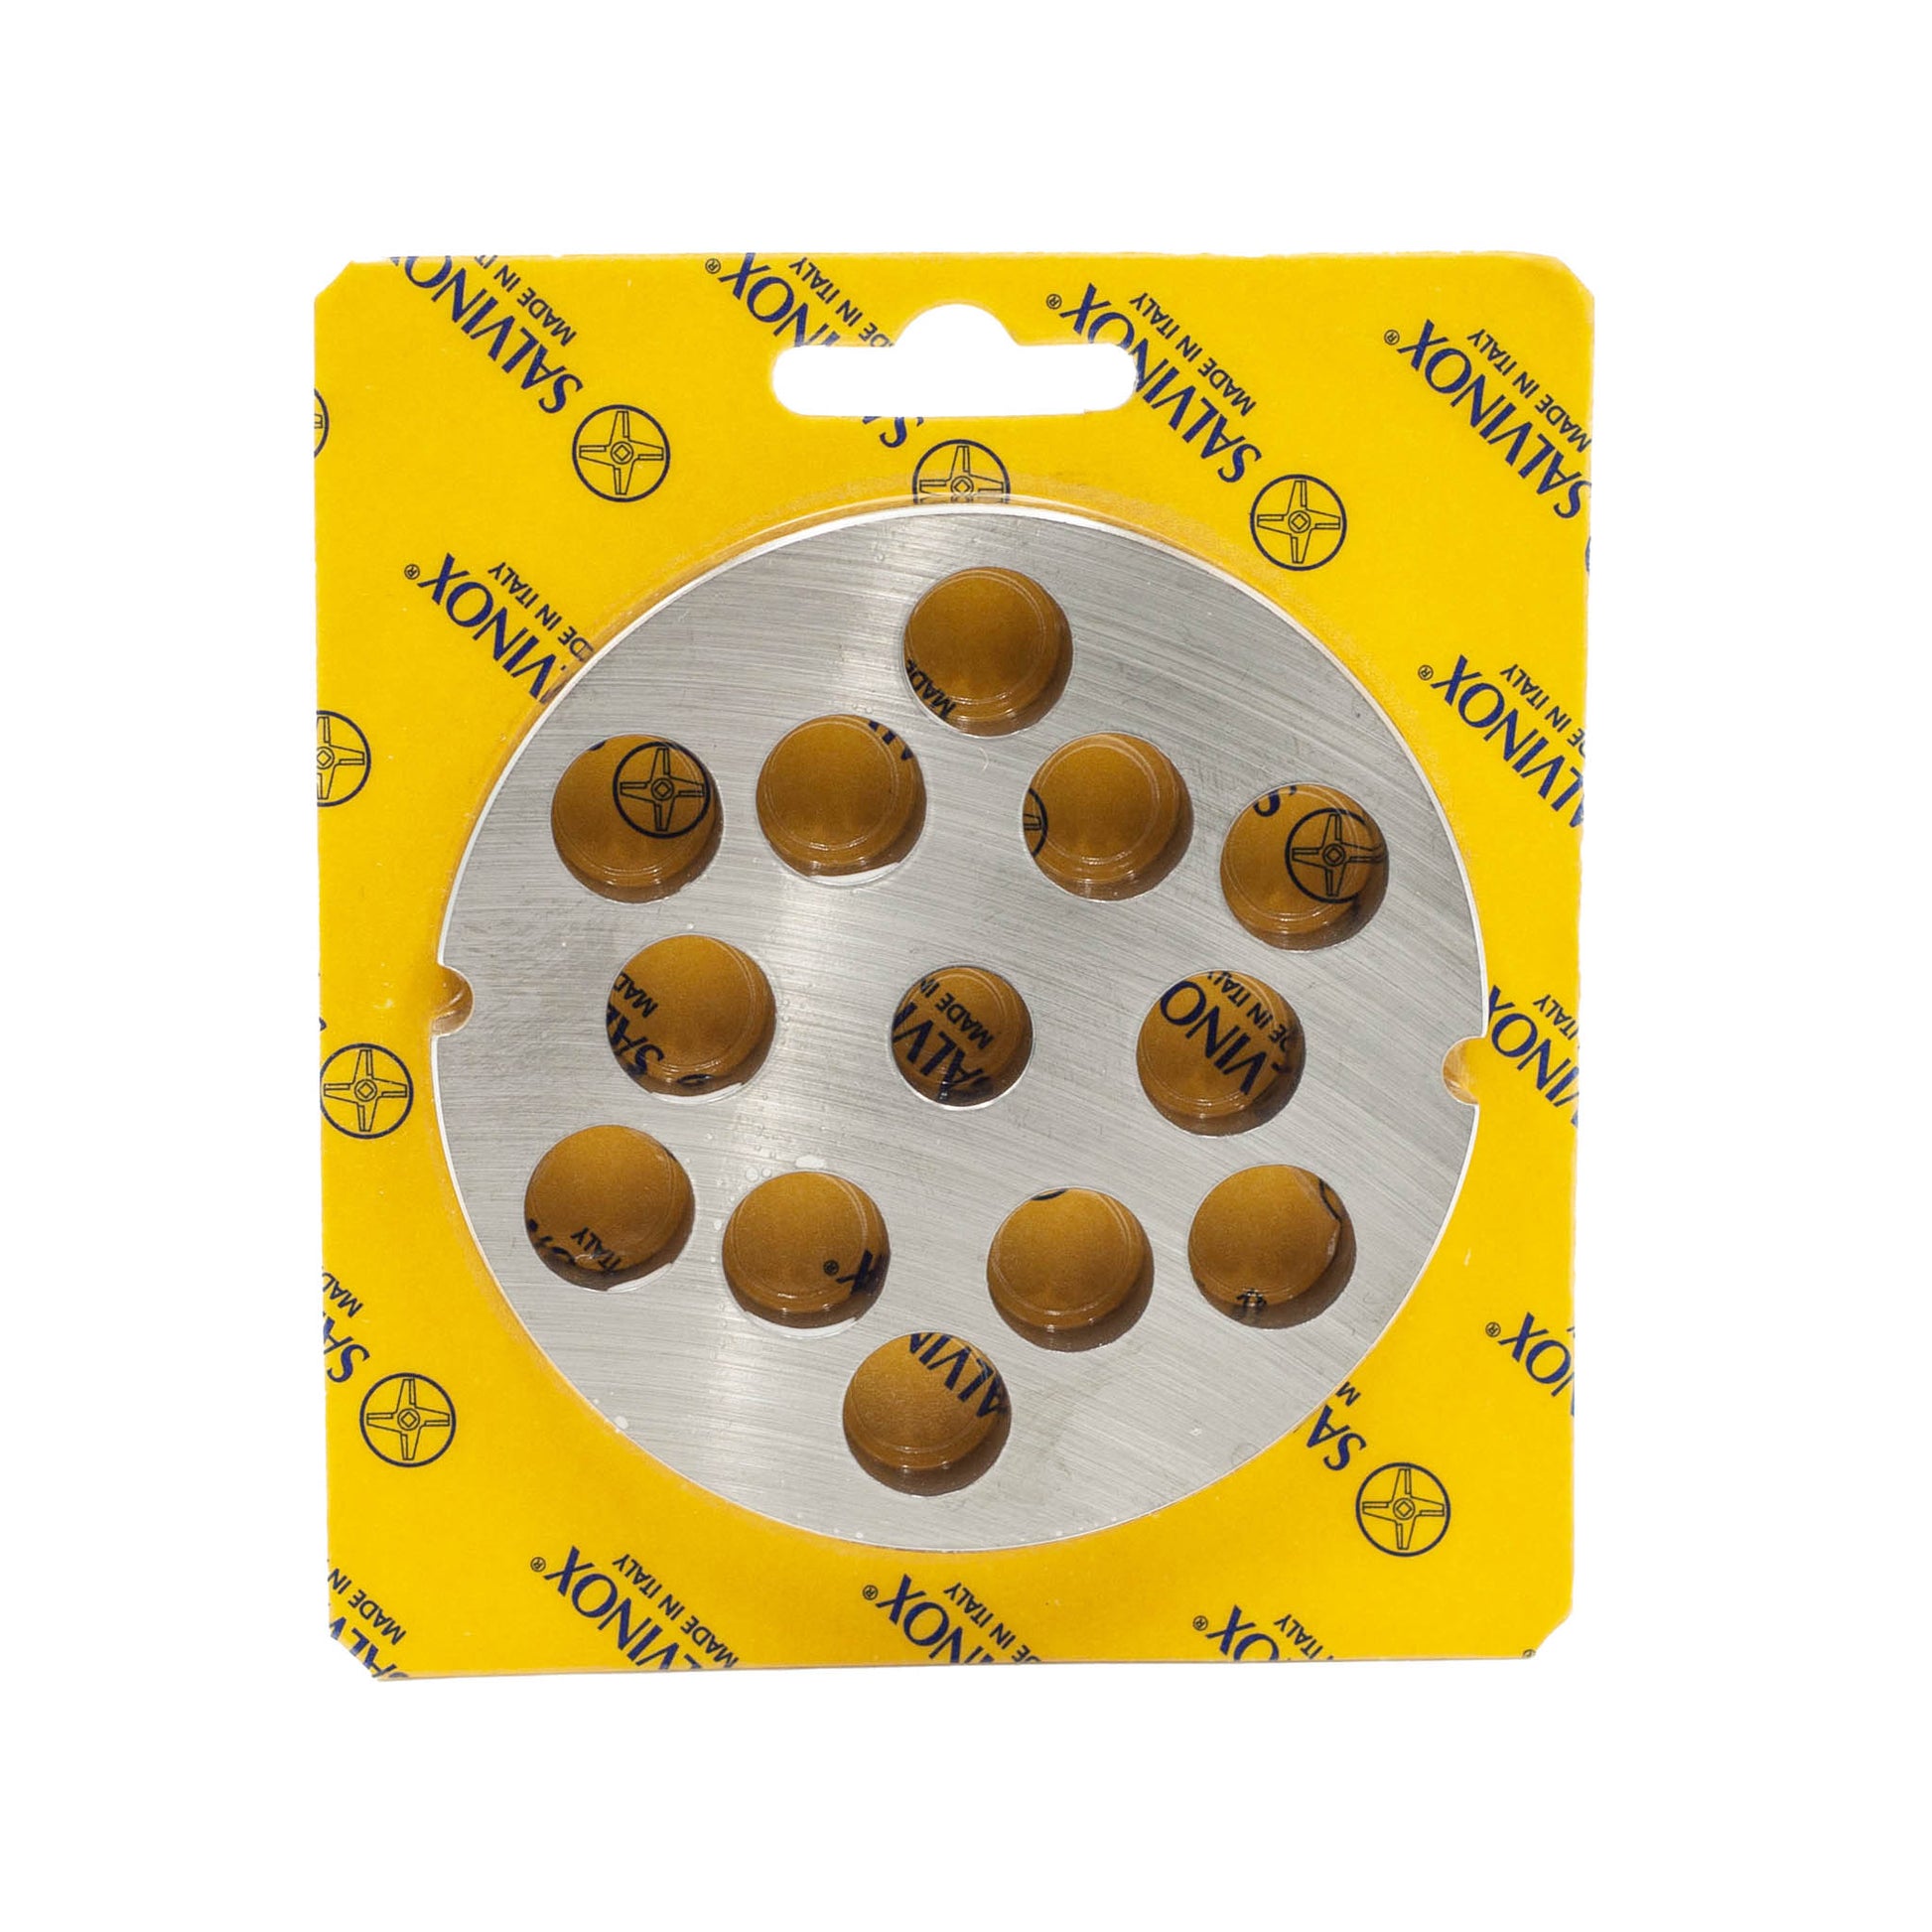 Size 32 with 16mm holes stainless steel replacement mincer plate for salami and sausage mincing machines. 